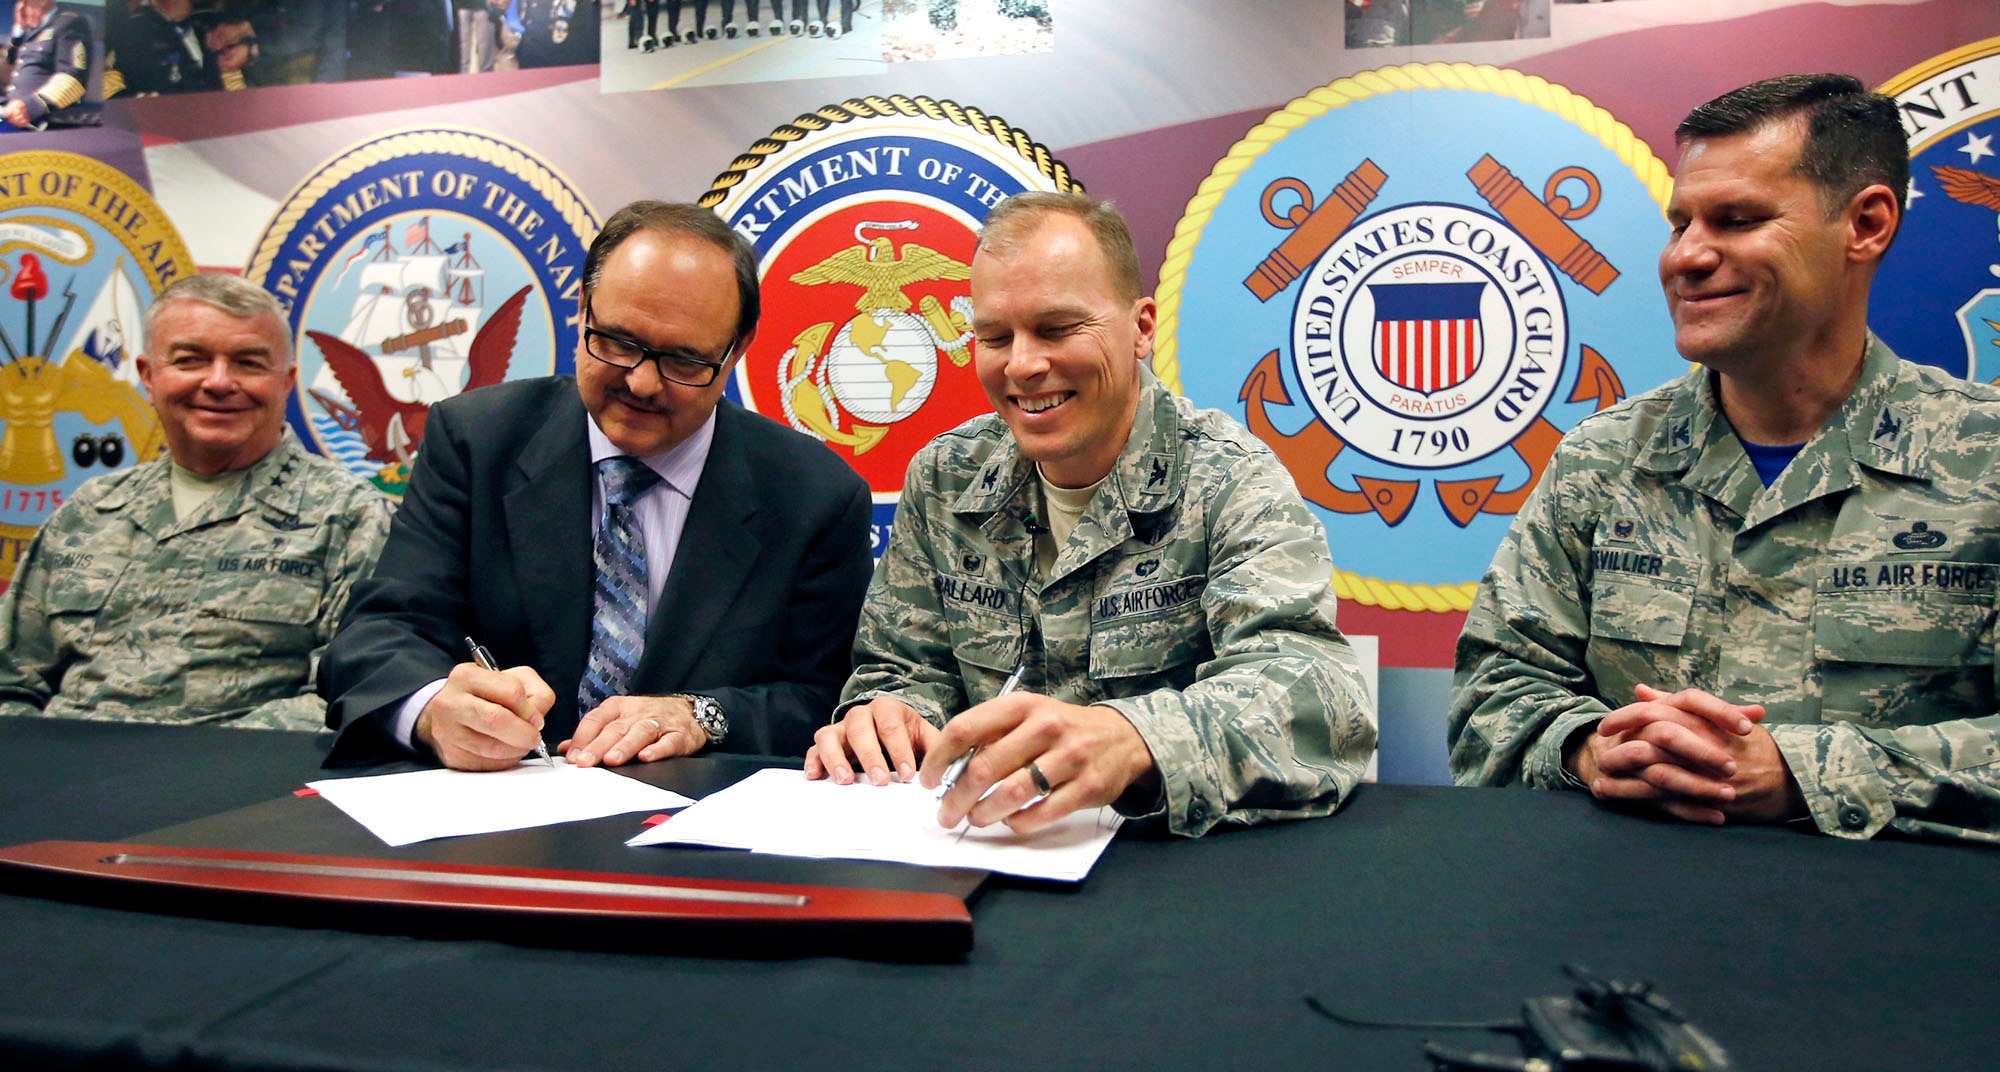 Jack Hetrick, network director for Veterans Integrated Service Network, VISN 10 (center left) and Col. Tim Ballard, 88th Medical Group commander, sign an agreement May 1 designed to improve the timeliness of medical care to veterans throughout Ohio. The signing will allow the VA to send veterans to Wright-Patterson Medical Center for inpatient or outpatient services, expanding the current relationship between VISN 10 and the Department of Defense. The men were flanked by Surgeon General of the Air Force Lt. Gen. (Dr.) Thomas Travis (far left) and Col. John Devillier, 88th Air Base Wing commander. (Cox Media Group Ohio photo by Ty Greenlees)